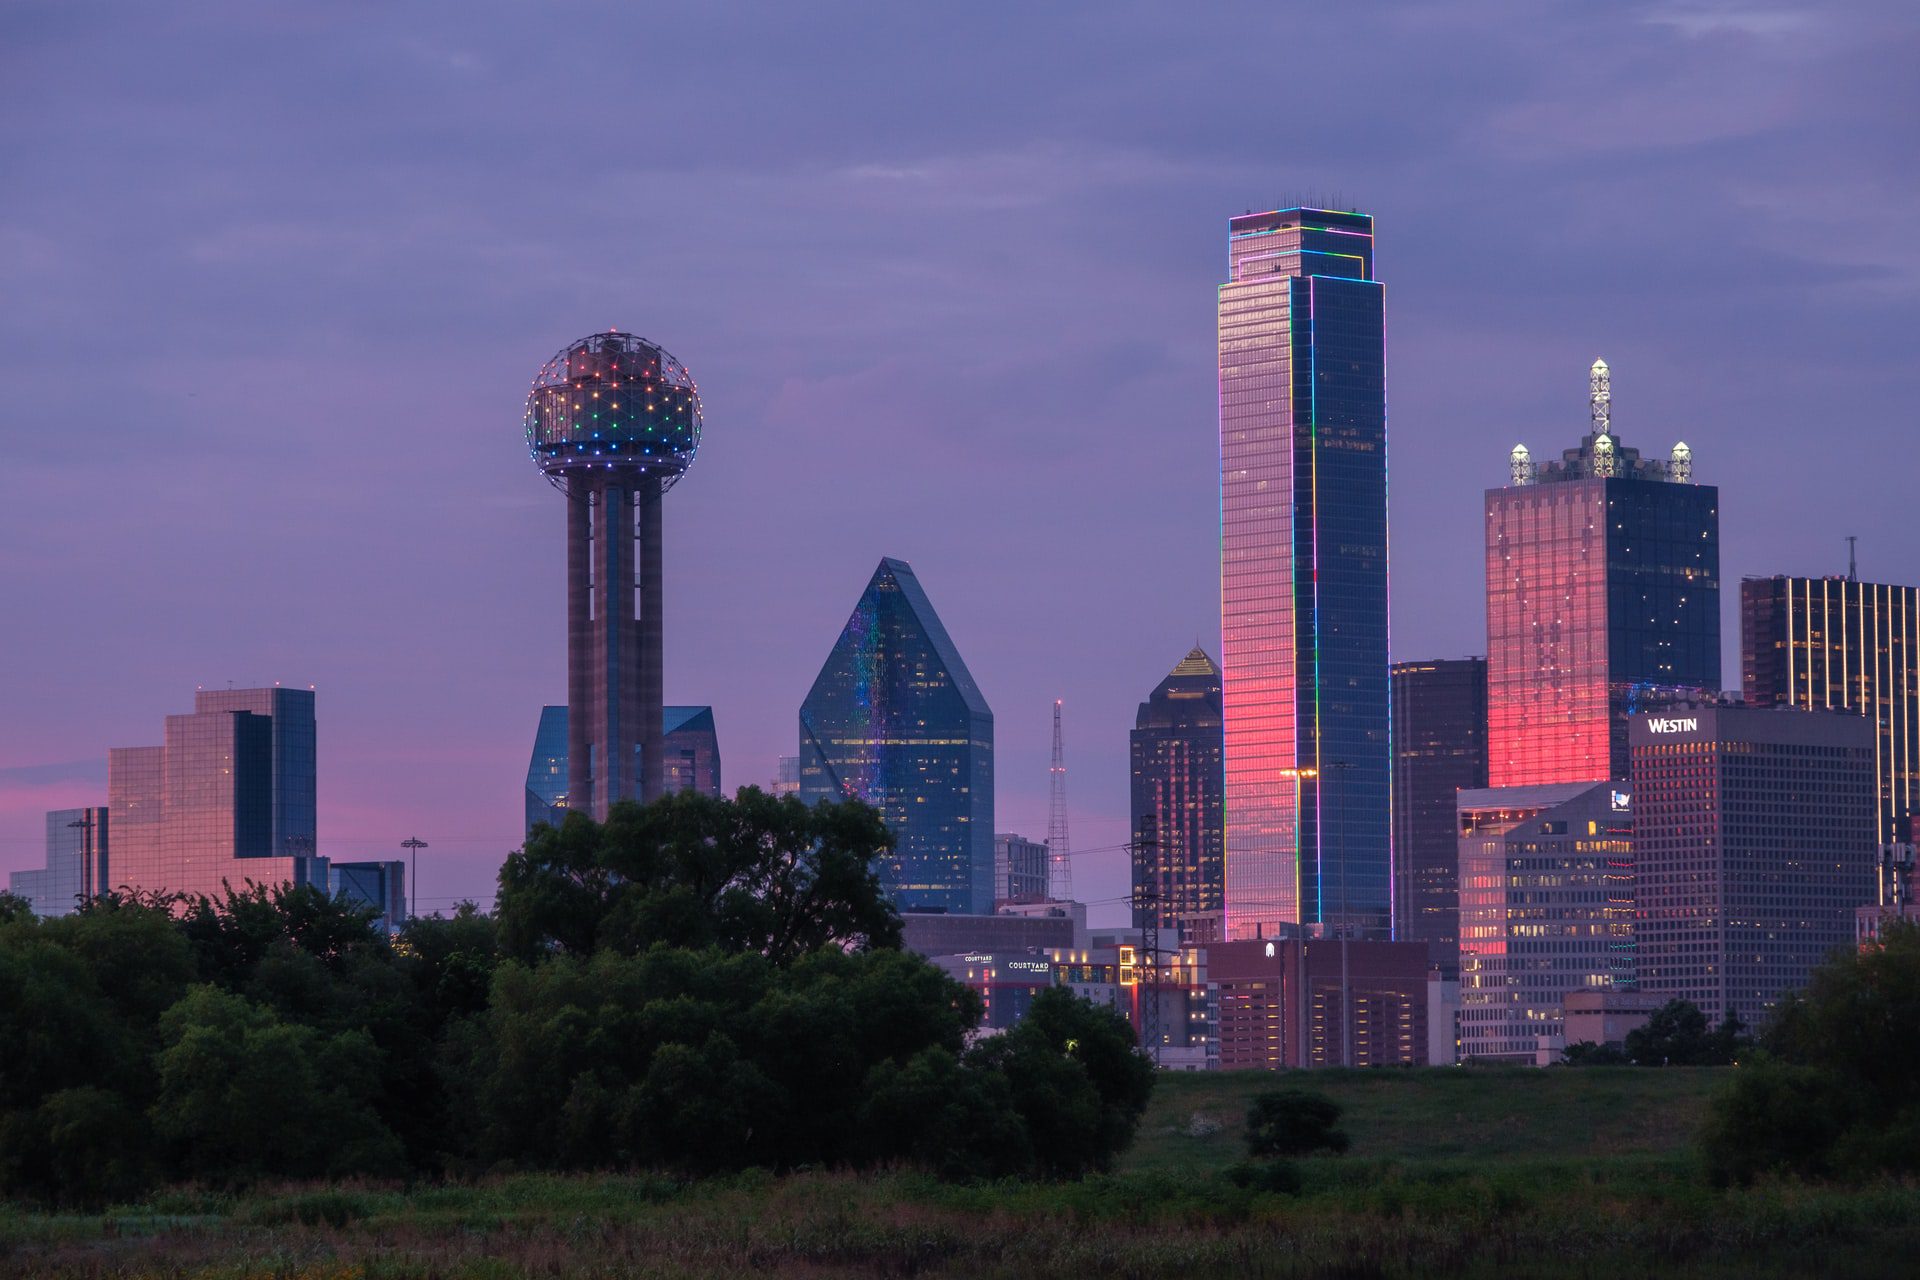 CWT's recapitalization plan was approved by a court in Dallas, Texas on November 12, 2021.